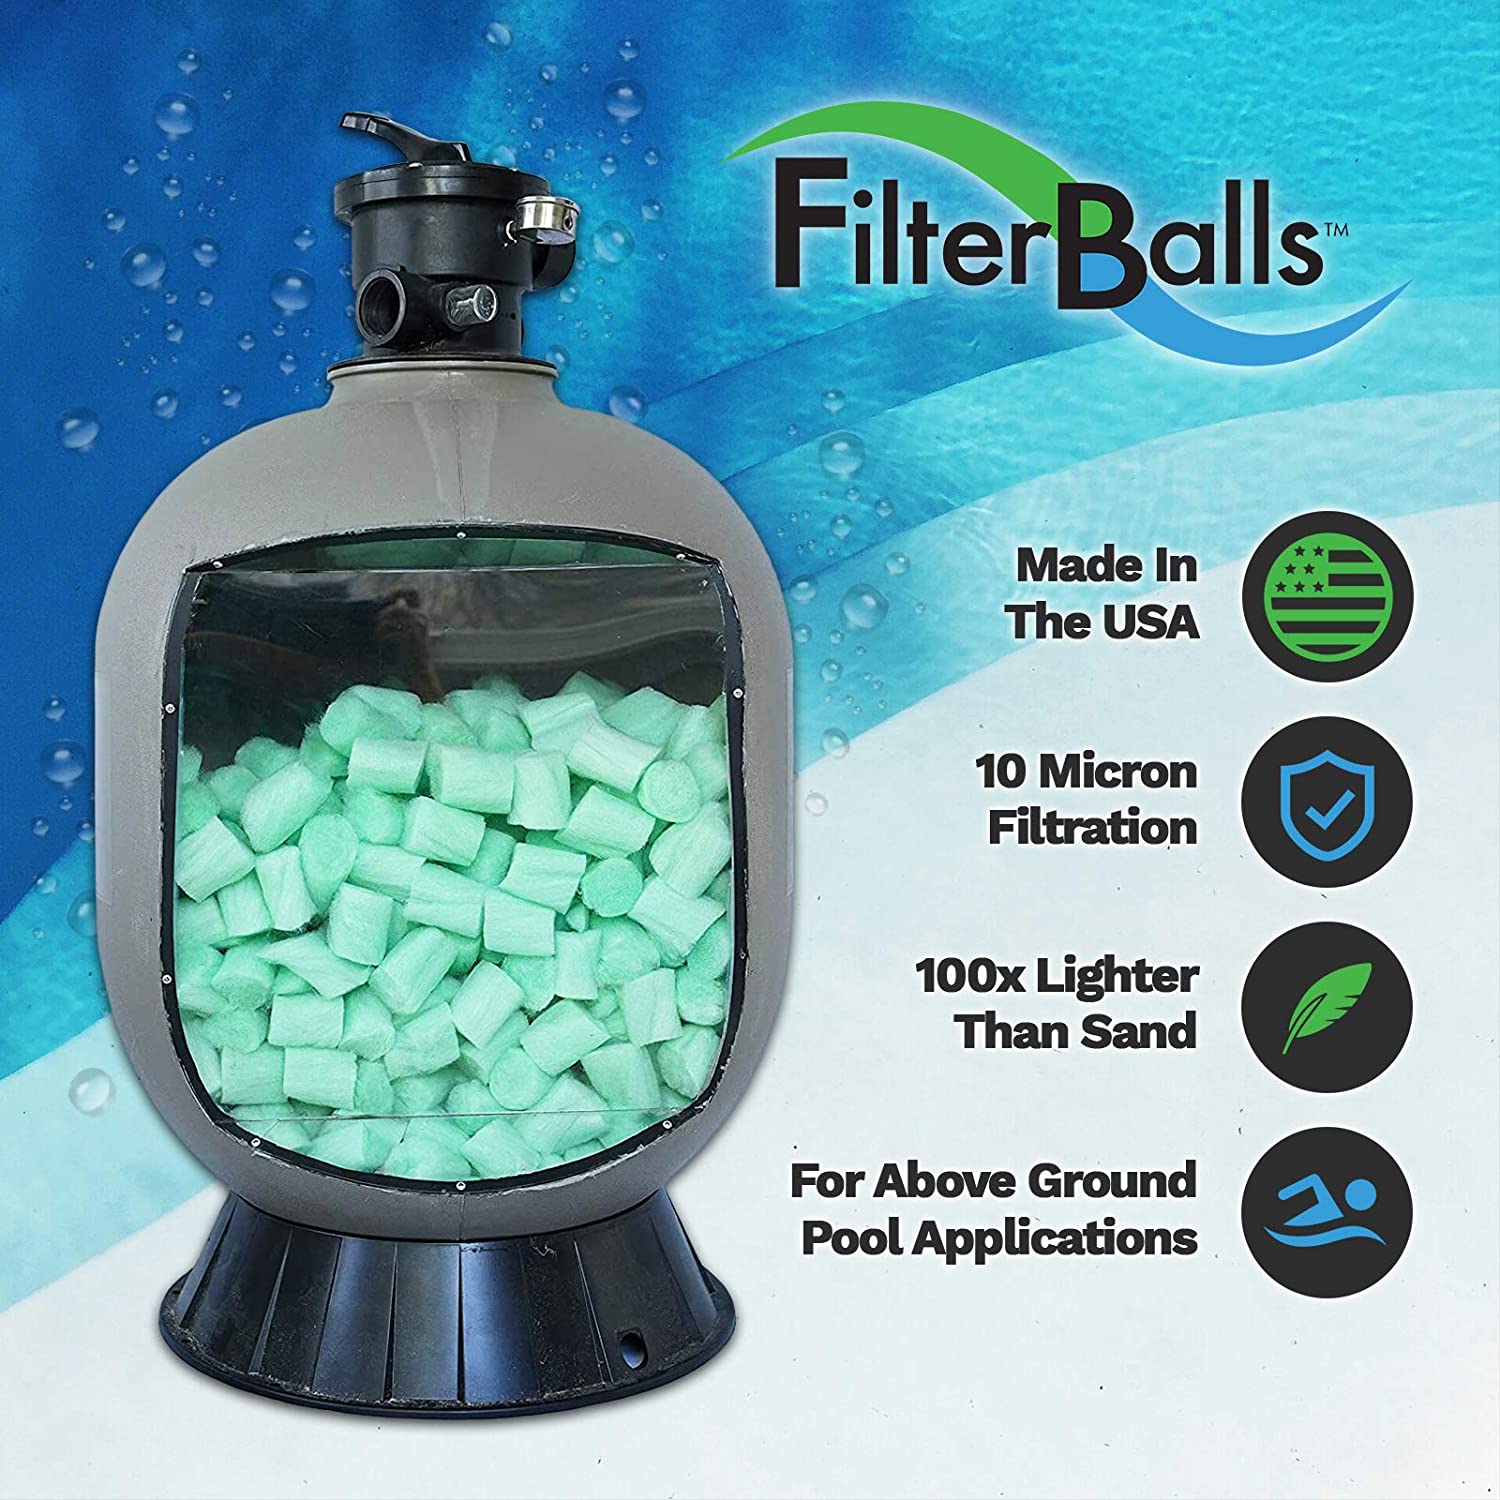 FilterBalls Filter Balls Pool Filter at department in Pool Filter Systems System the